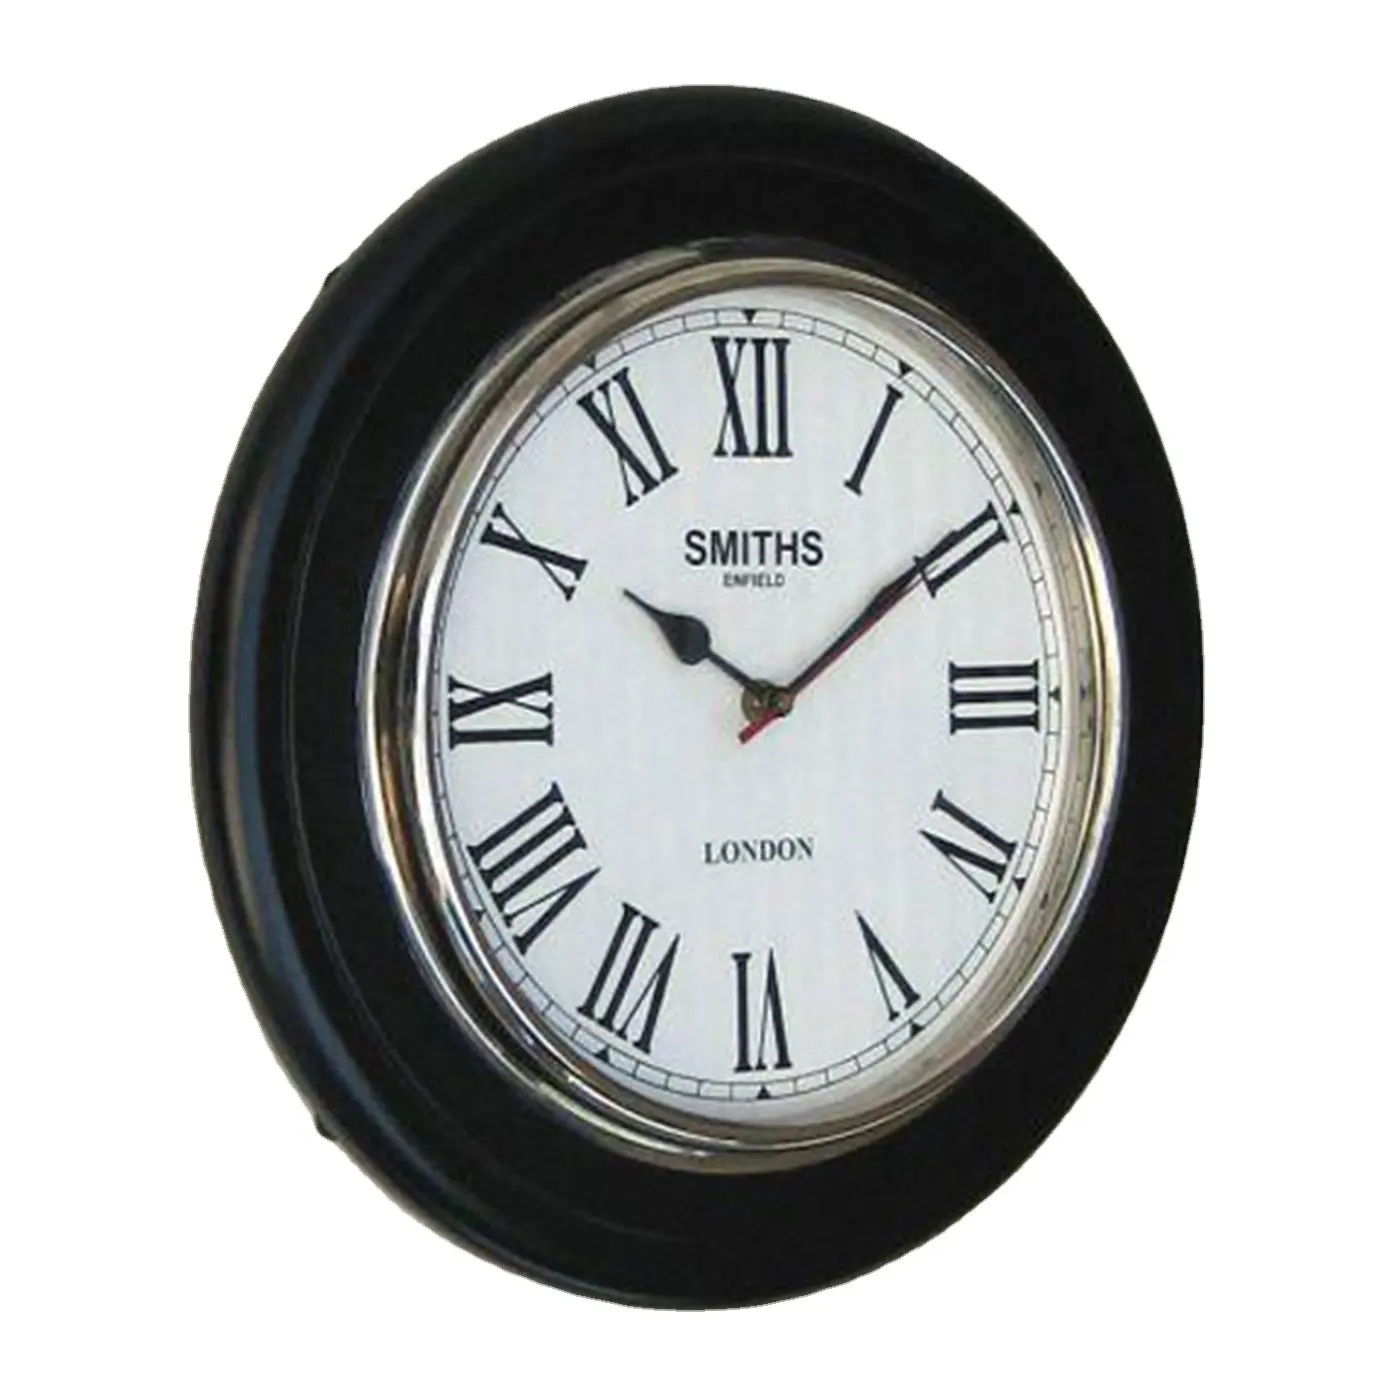 Home Decorative Bass Wall Clock Black Antique Finished and Roaming Number 1 to12 Molding Wall Clock Wholesale Price